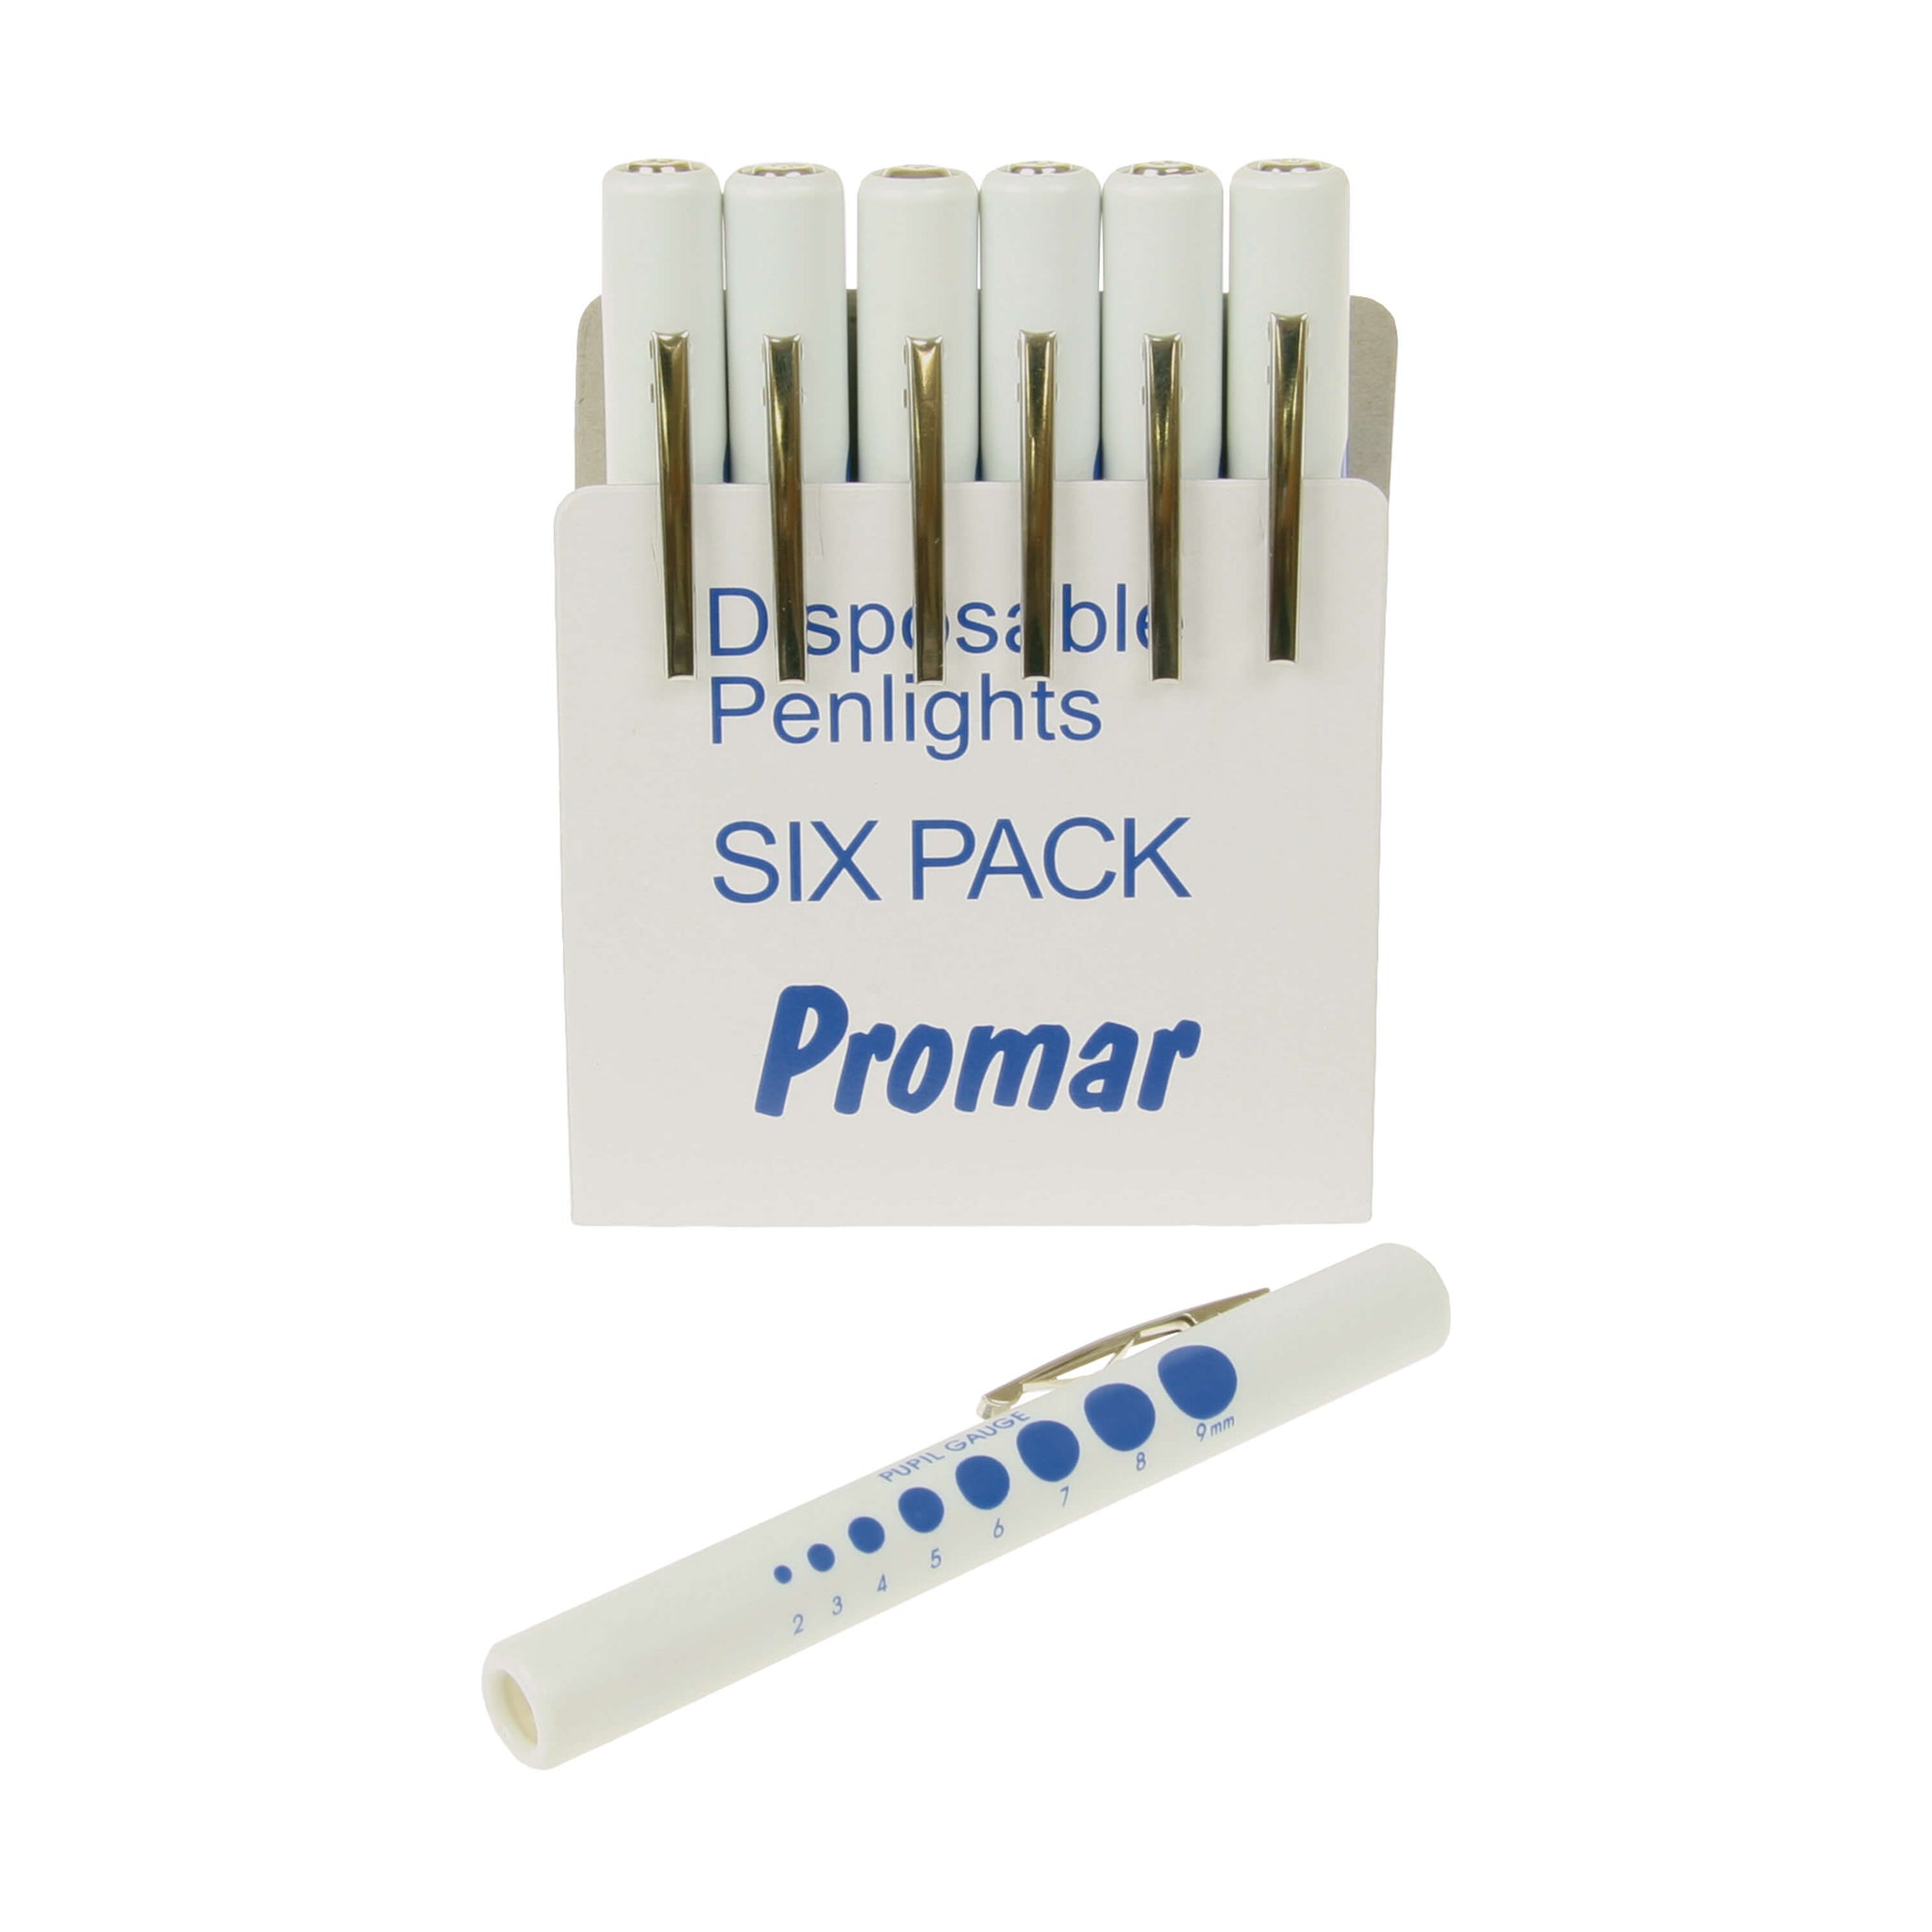 Penlight Torches- Disposable, 6 Pack